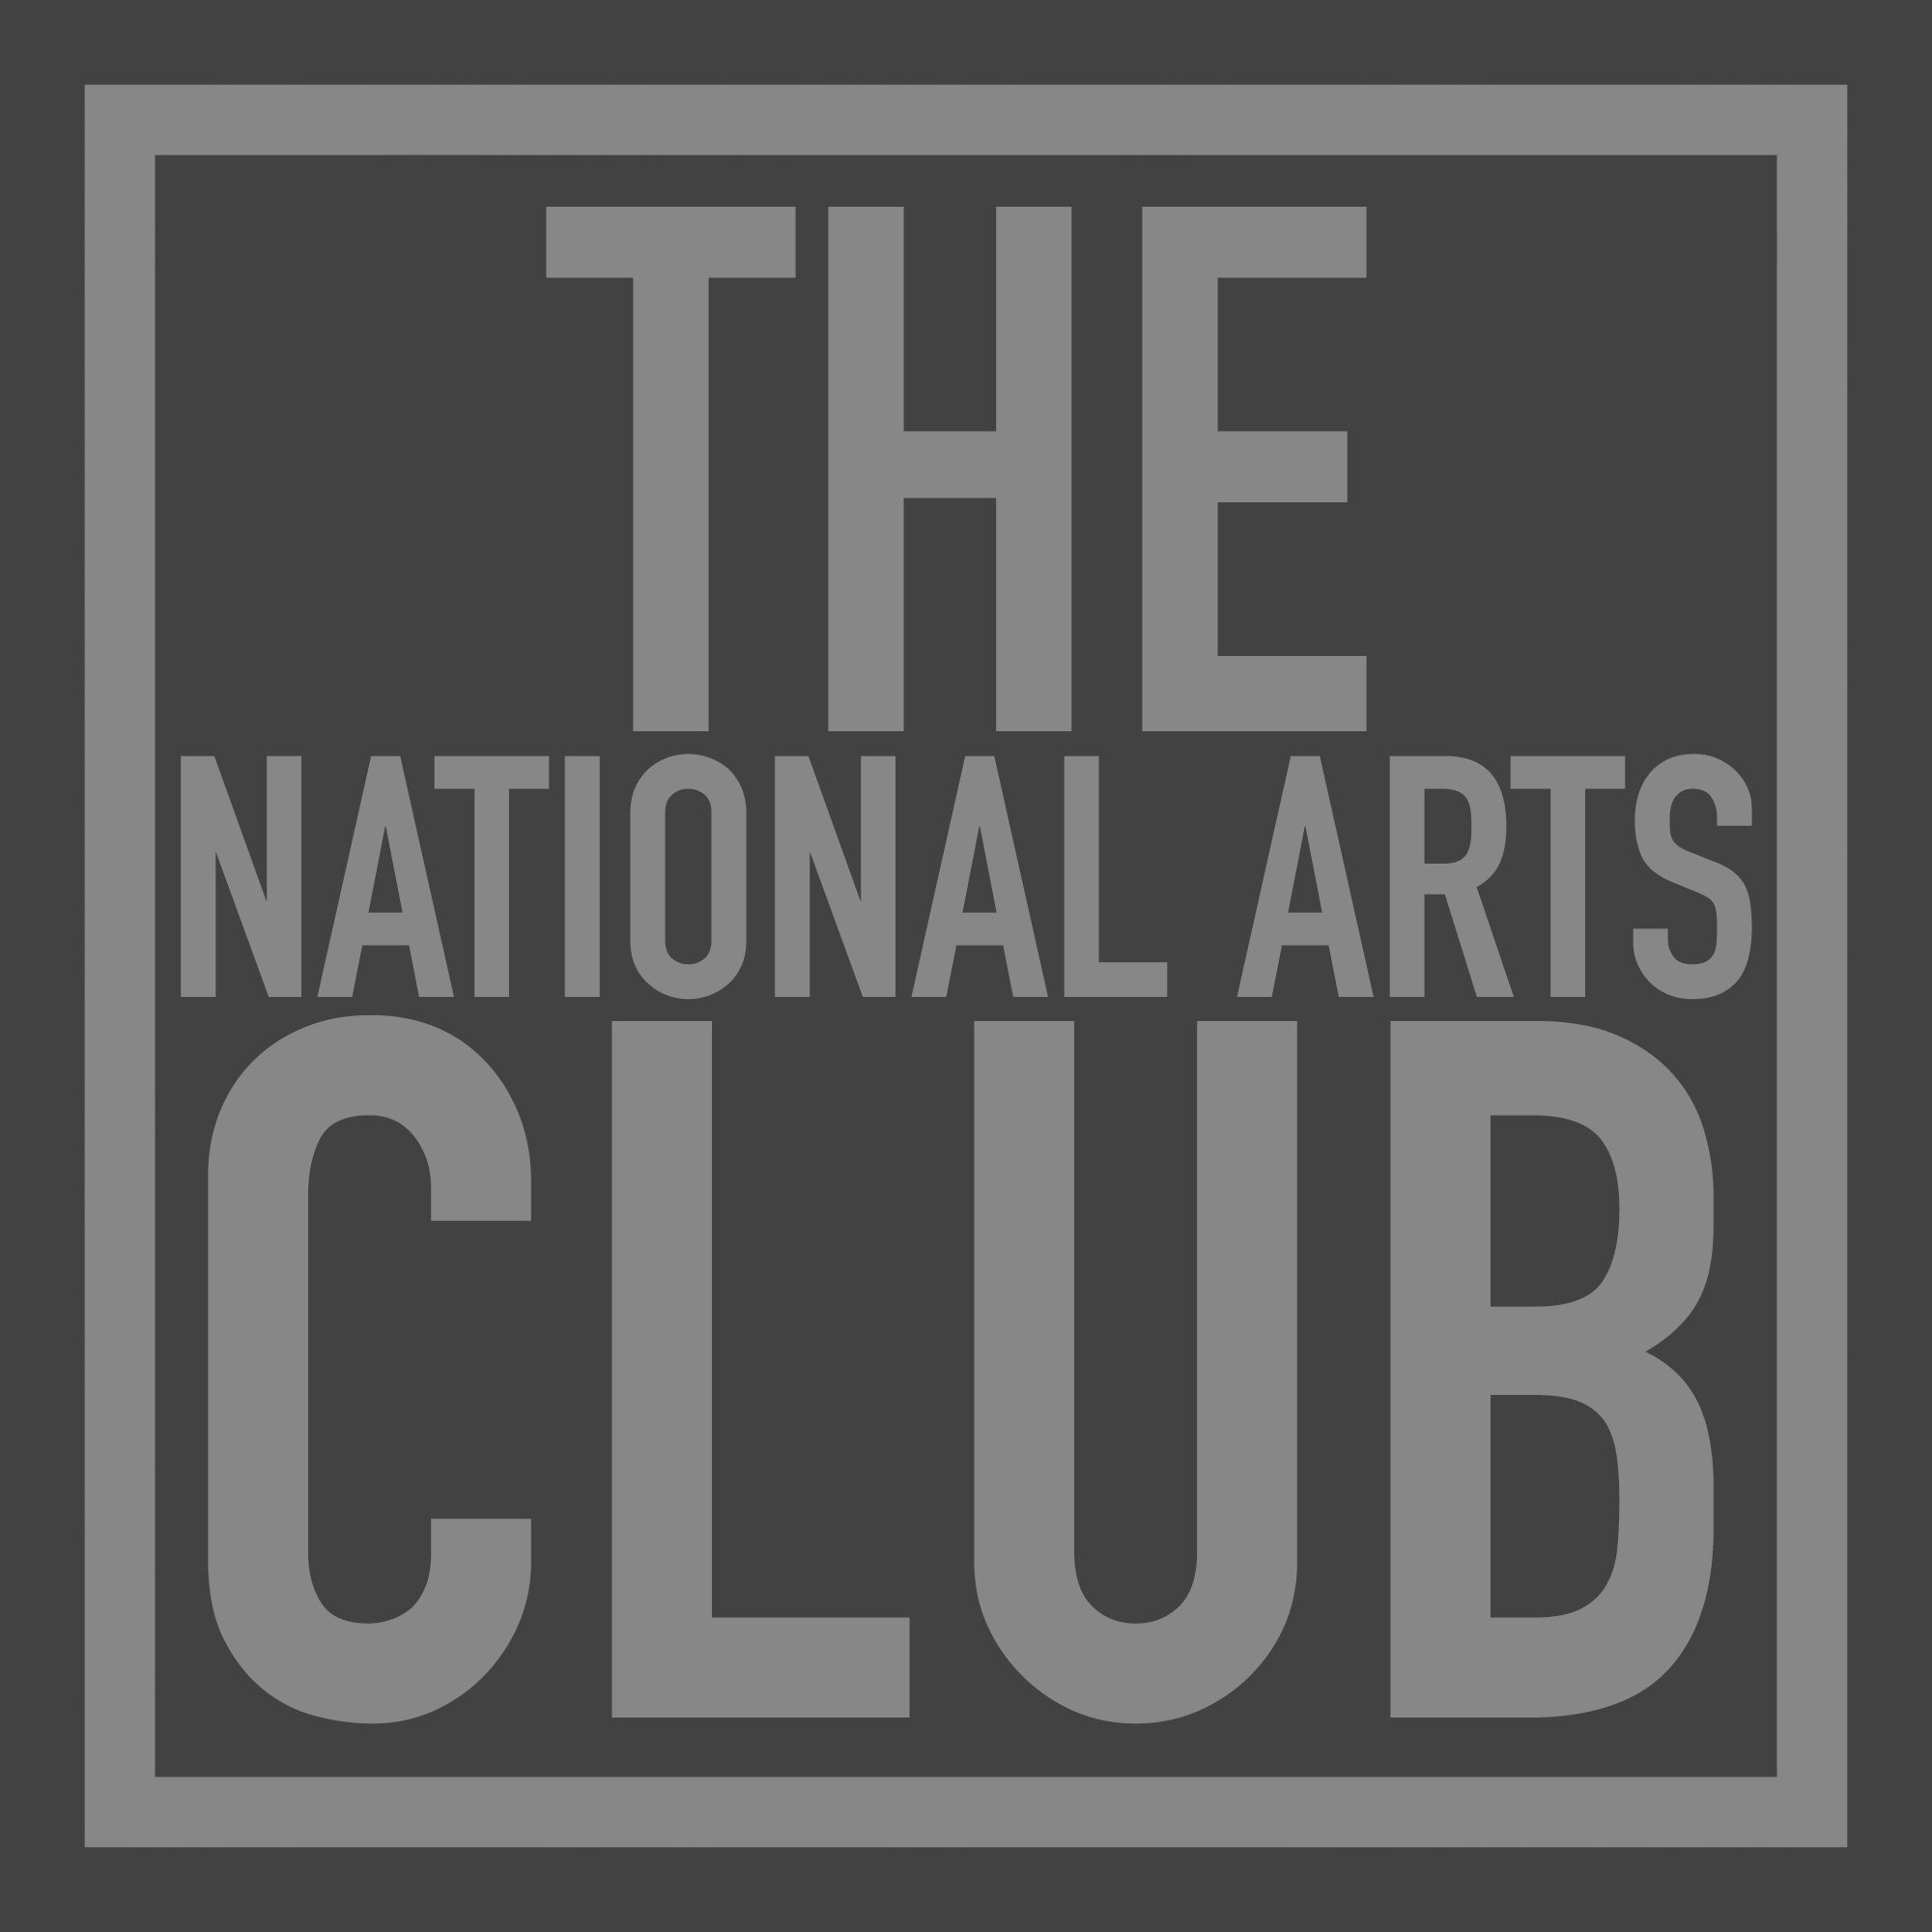 The National Arts Club